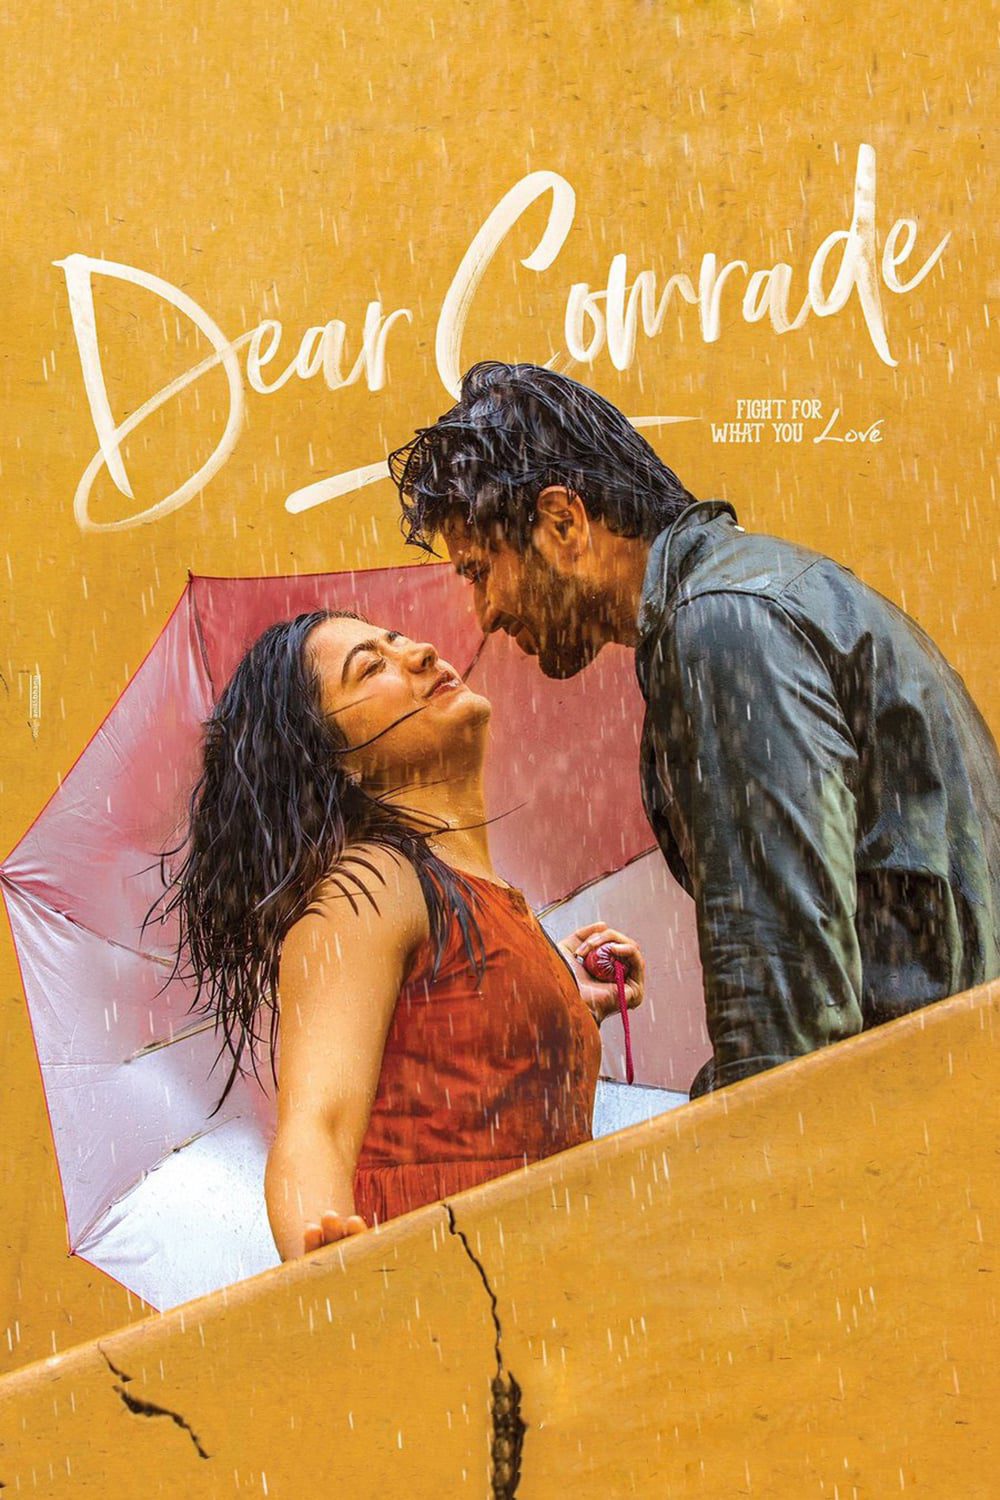 Poster for the movie "Dear Comrade"